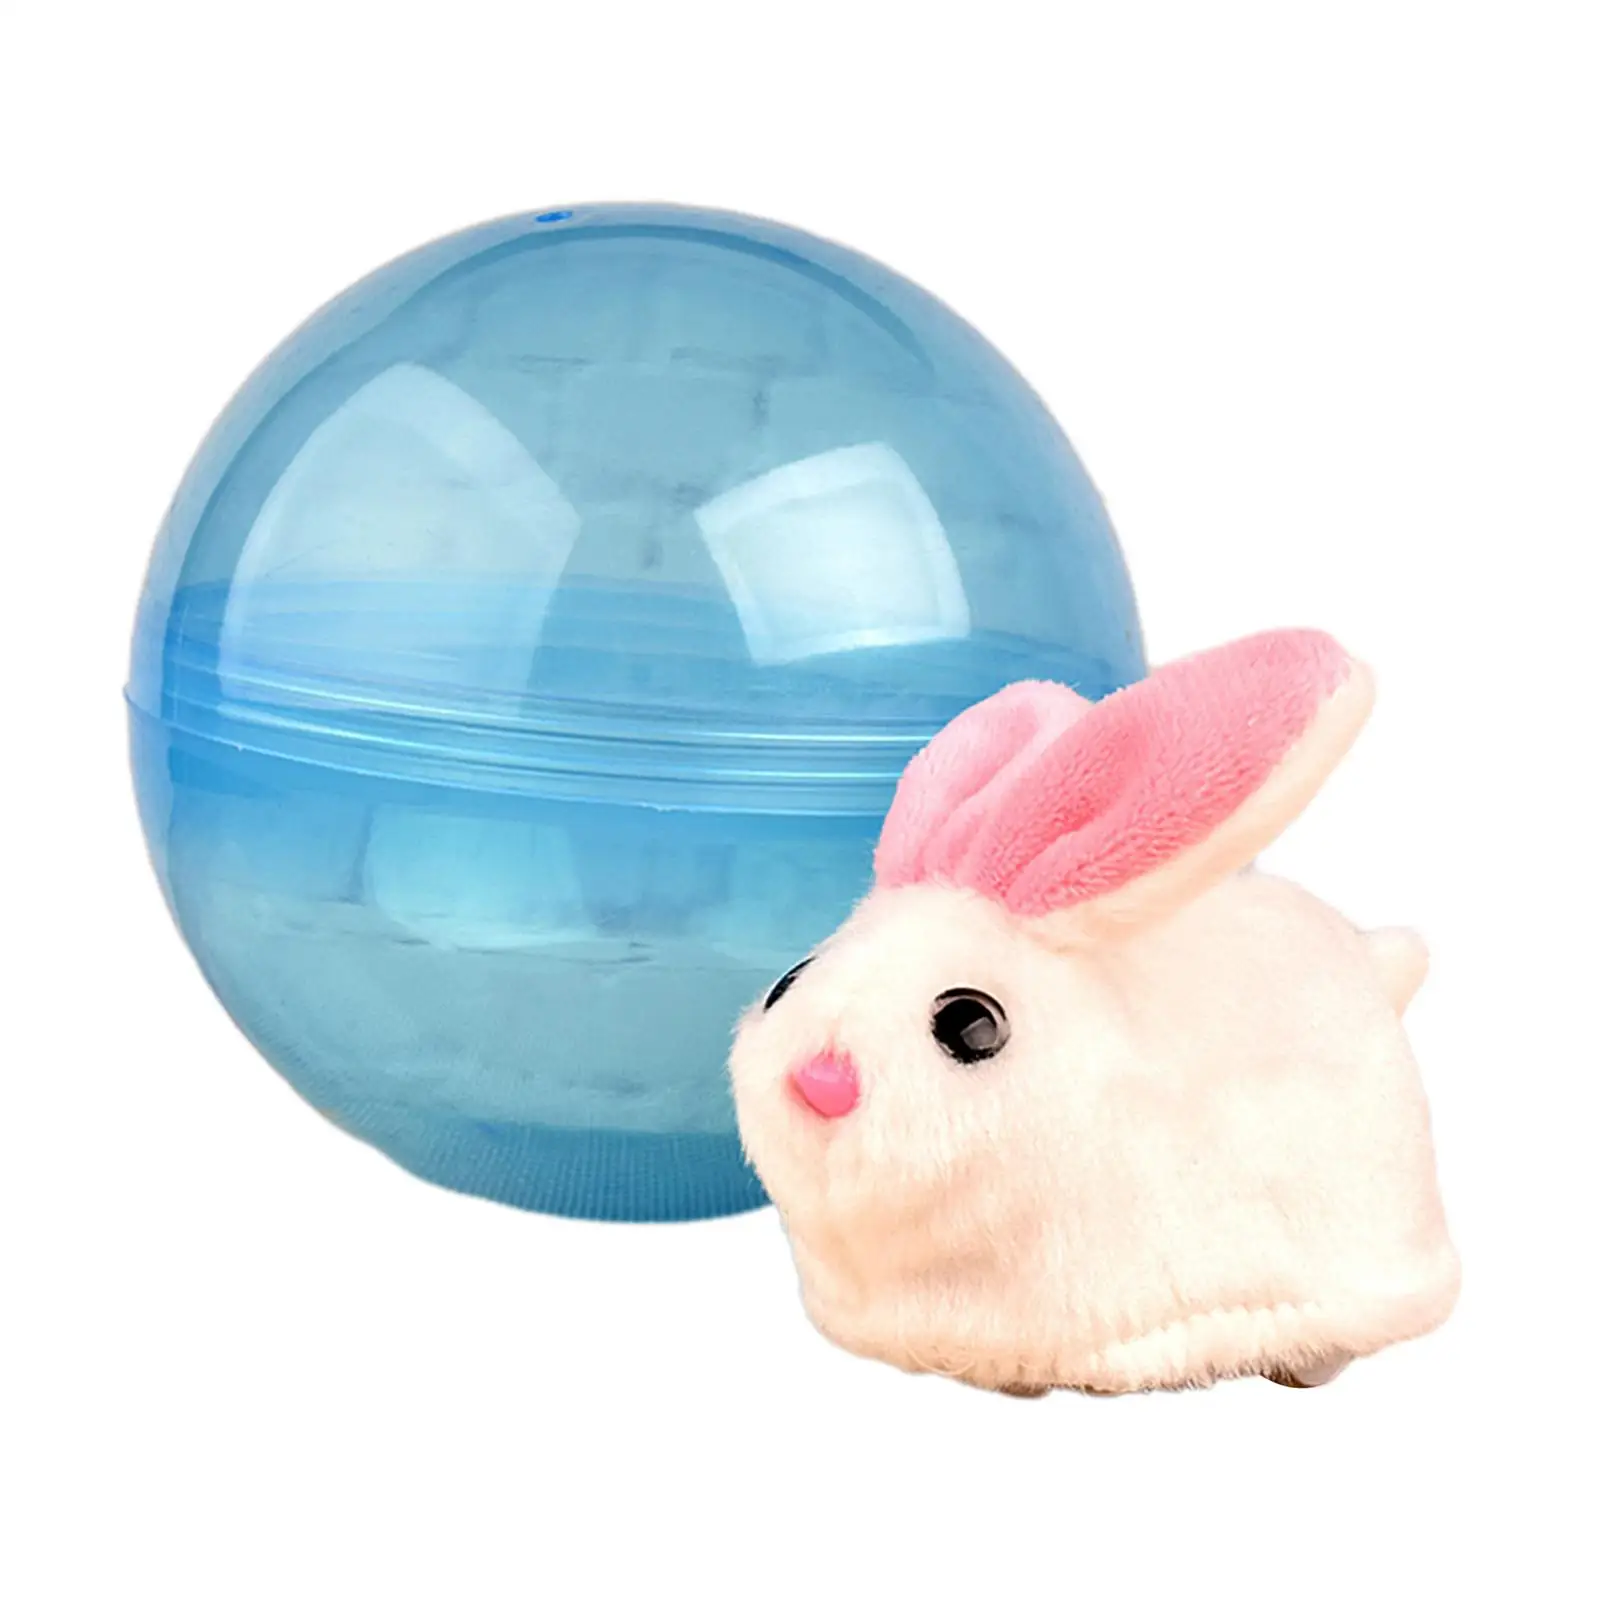 Electric Ball Toys Plush Animals Toys for Girls Toddlers Holiday Gifts